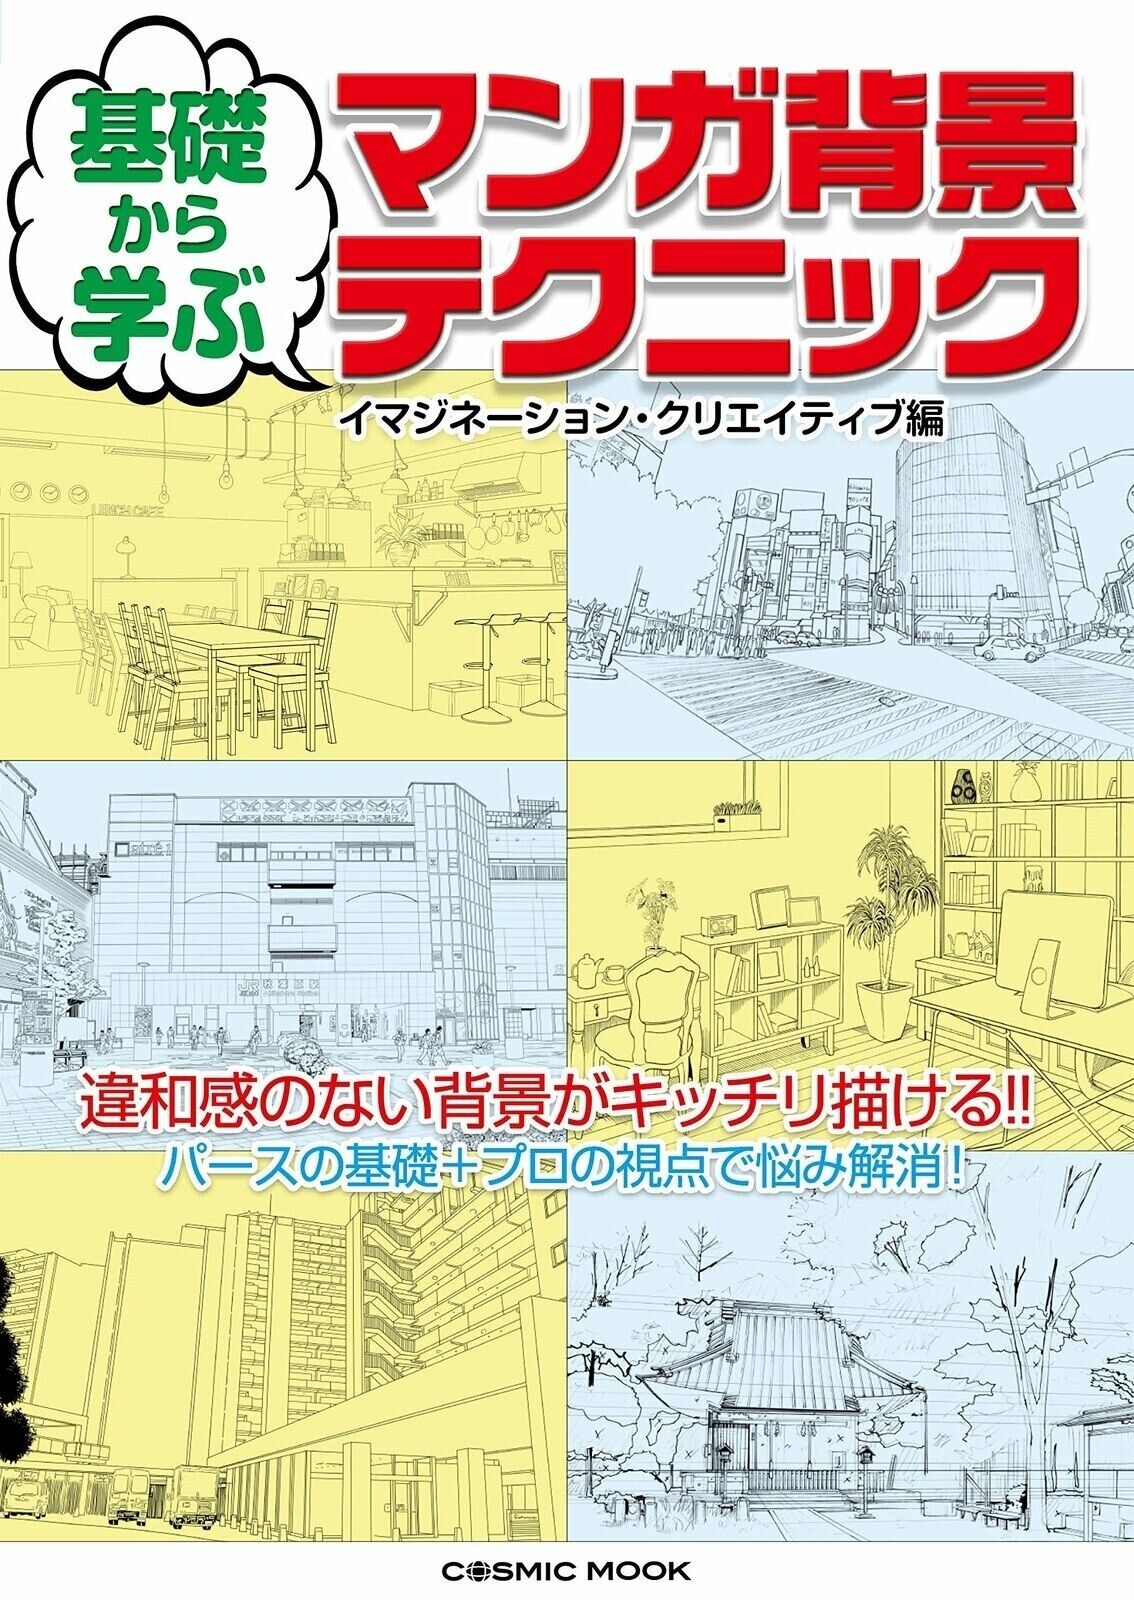 How to Draw Manga Background Techniques Anime Art Book Japanese 2017 Cosmic Mook